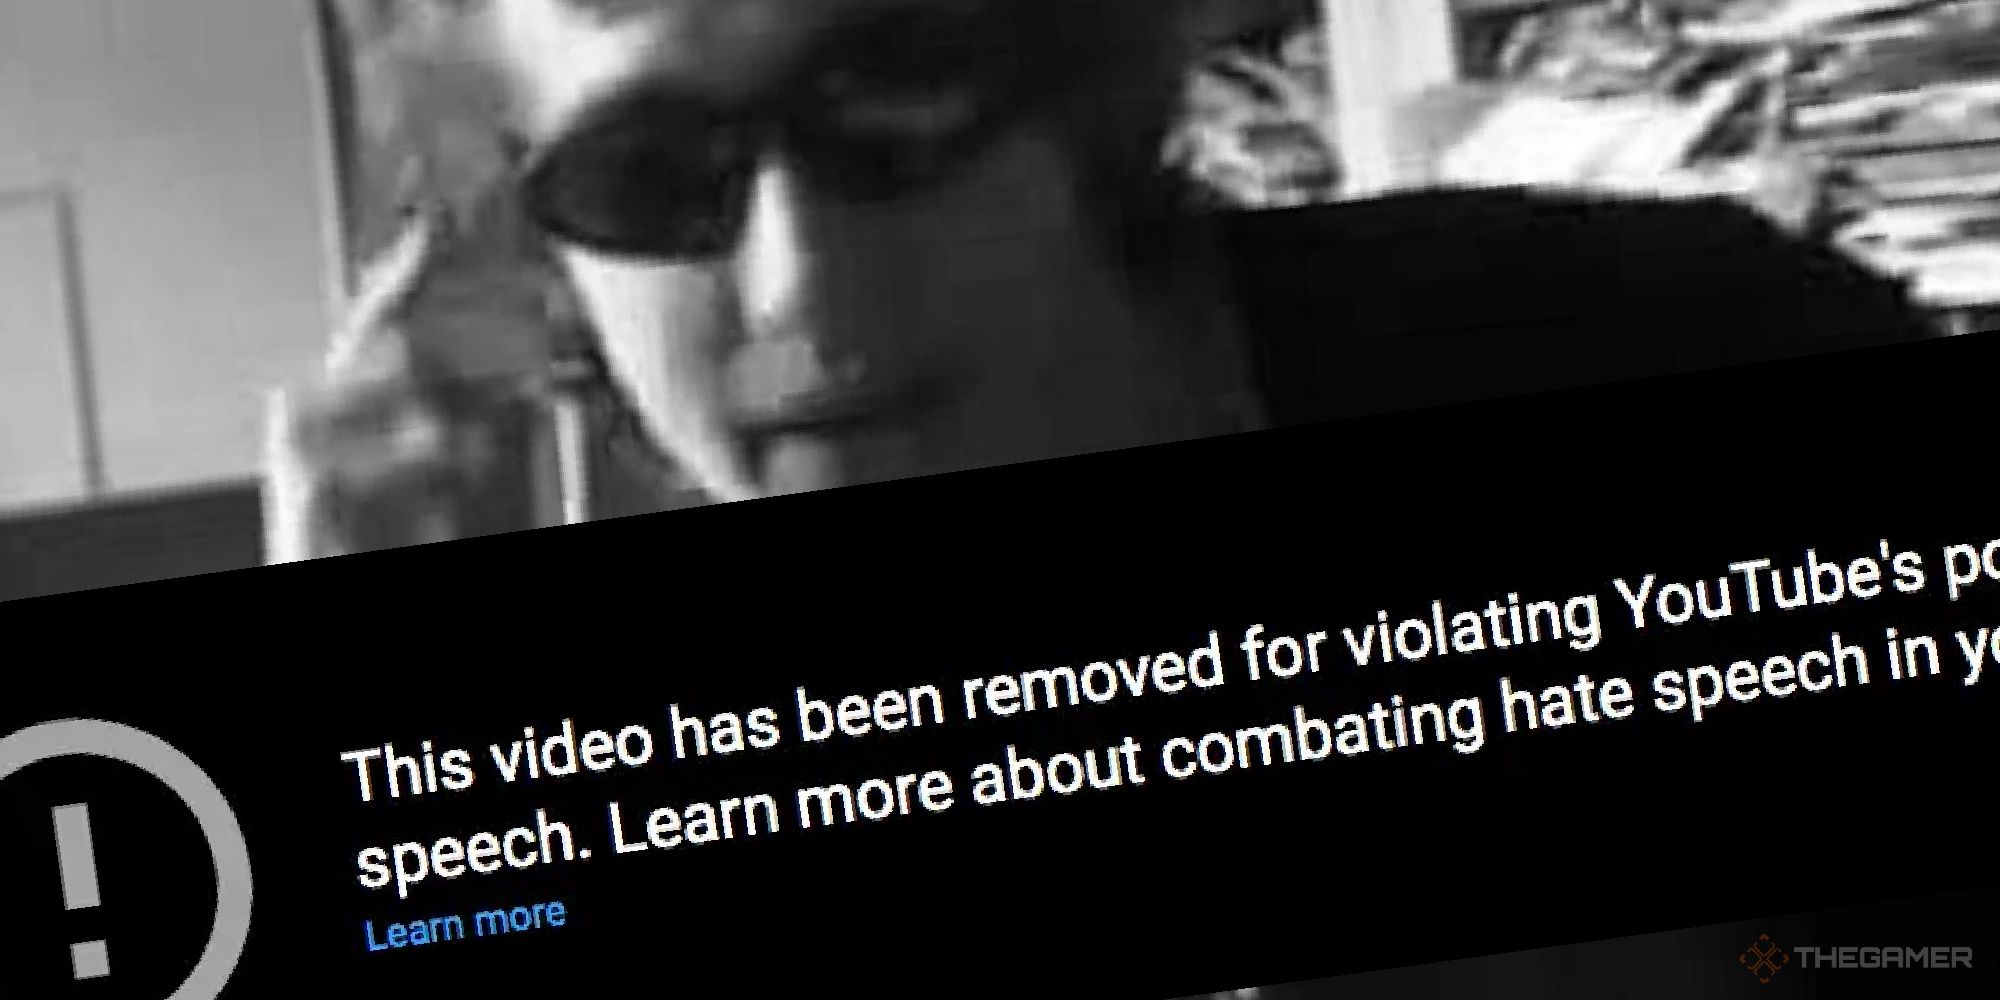 I cant believe you've done this frame split with a youtube terms of service violation message